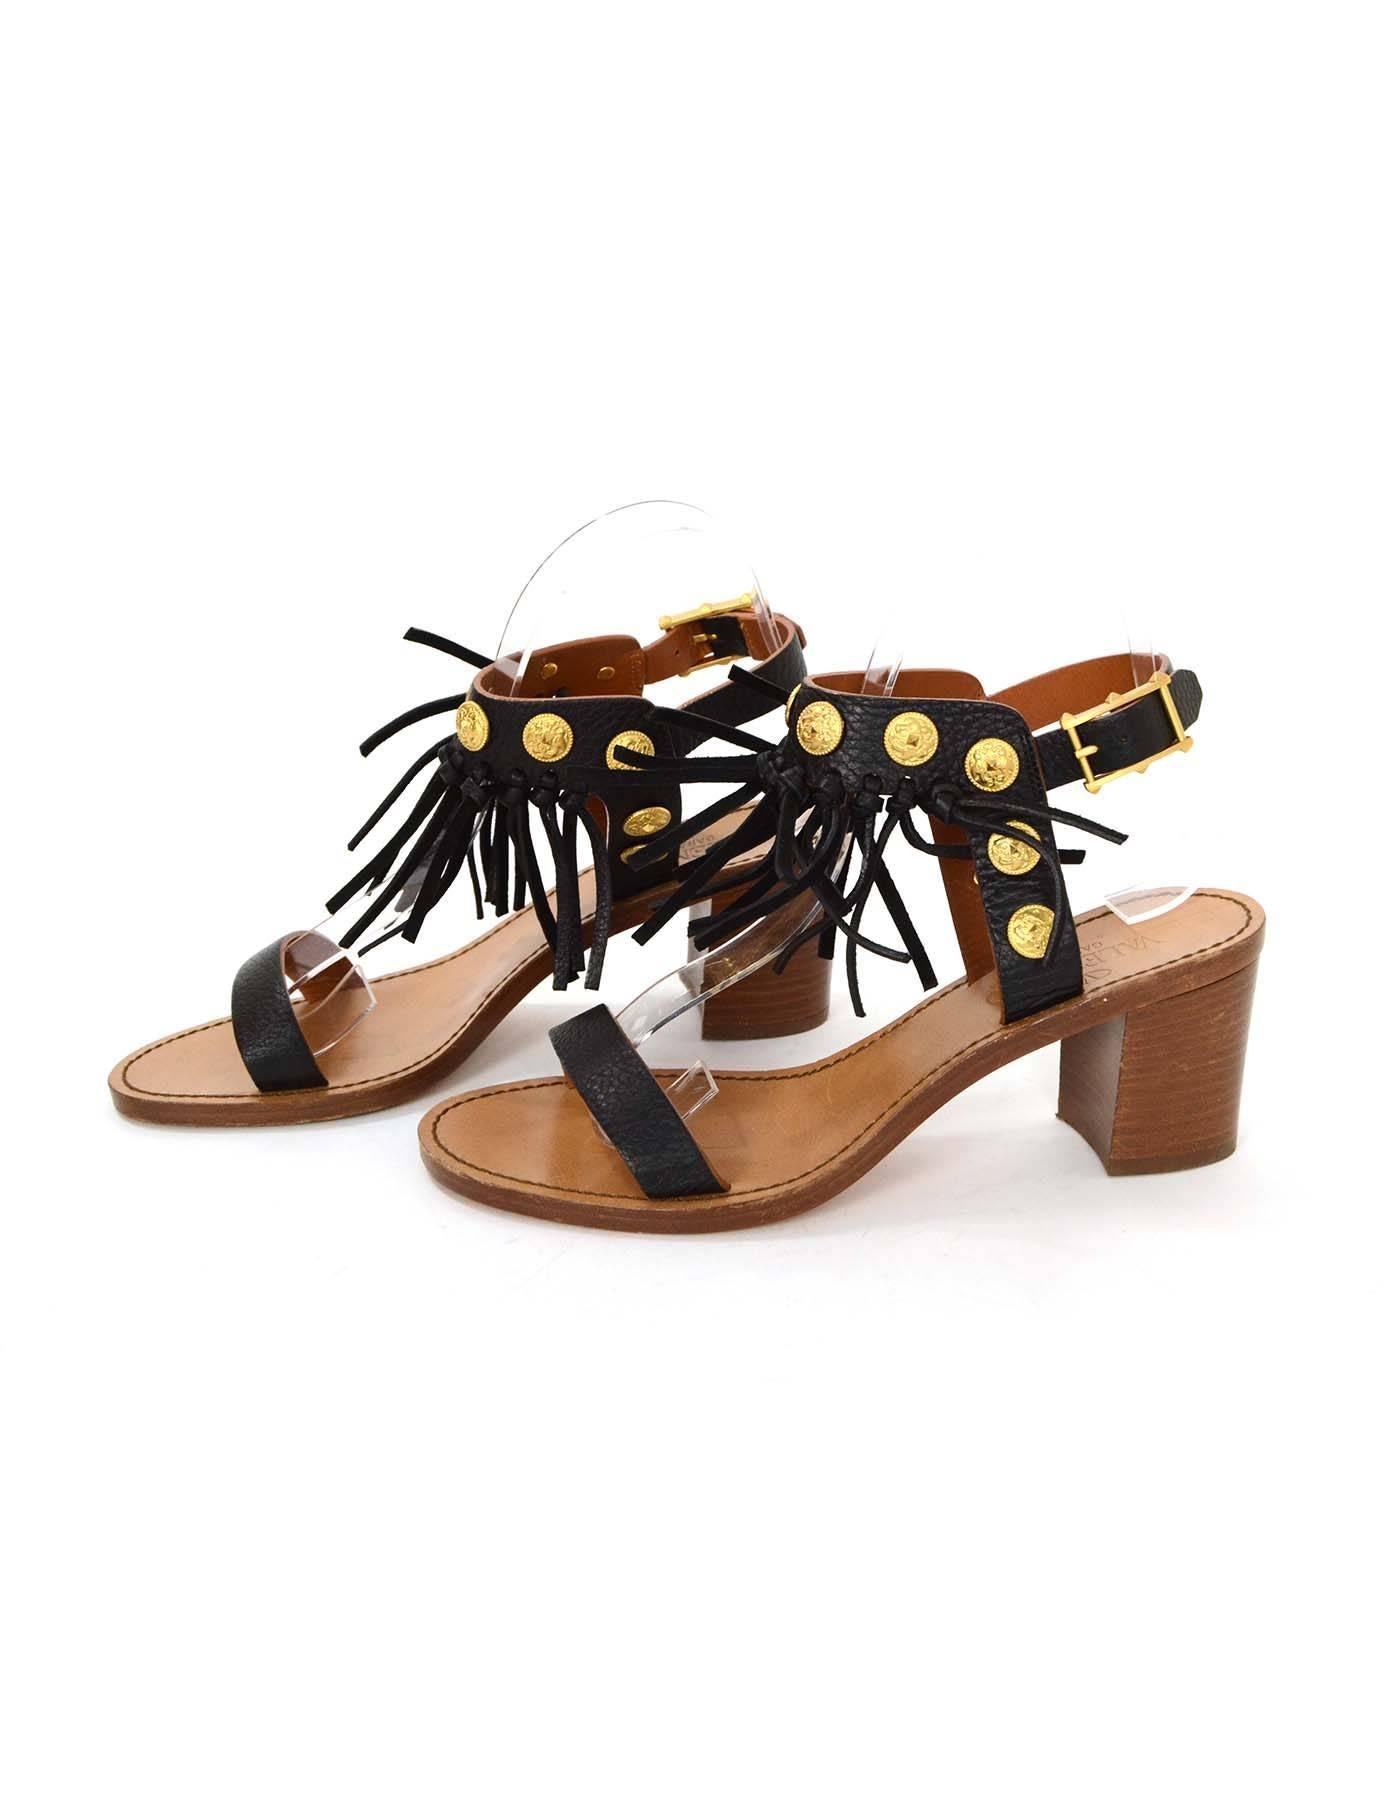 Valentino Black Leather Fringe Sandals 
Features gold coin studs throughout leather straps
Made In: Italy
Color: Black and tan
Materials: Leather, metal and wood
Closure/Opening: Ankle strap with buckle and notch closure
Sole Stamp: Valentino